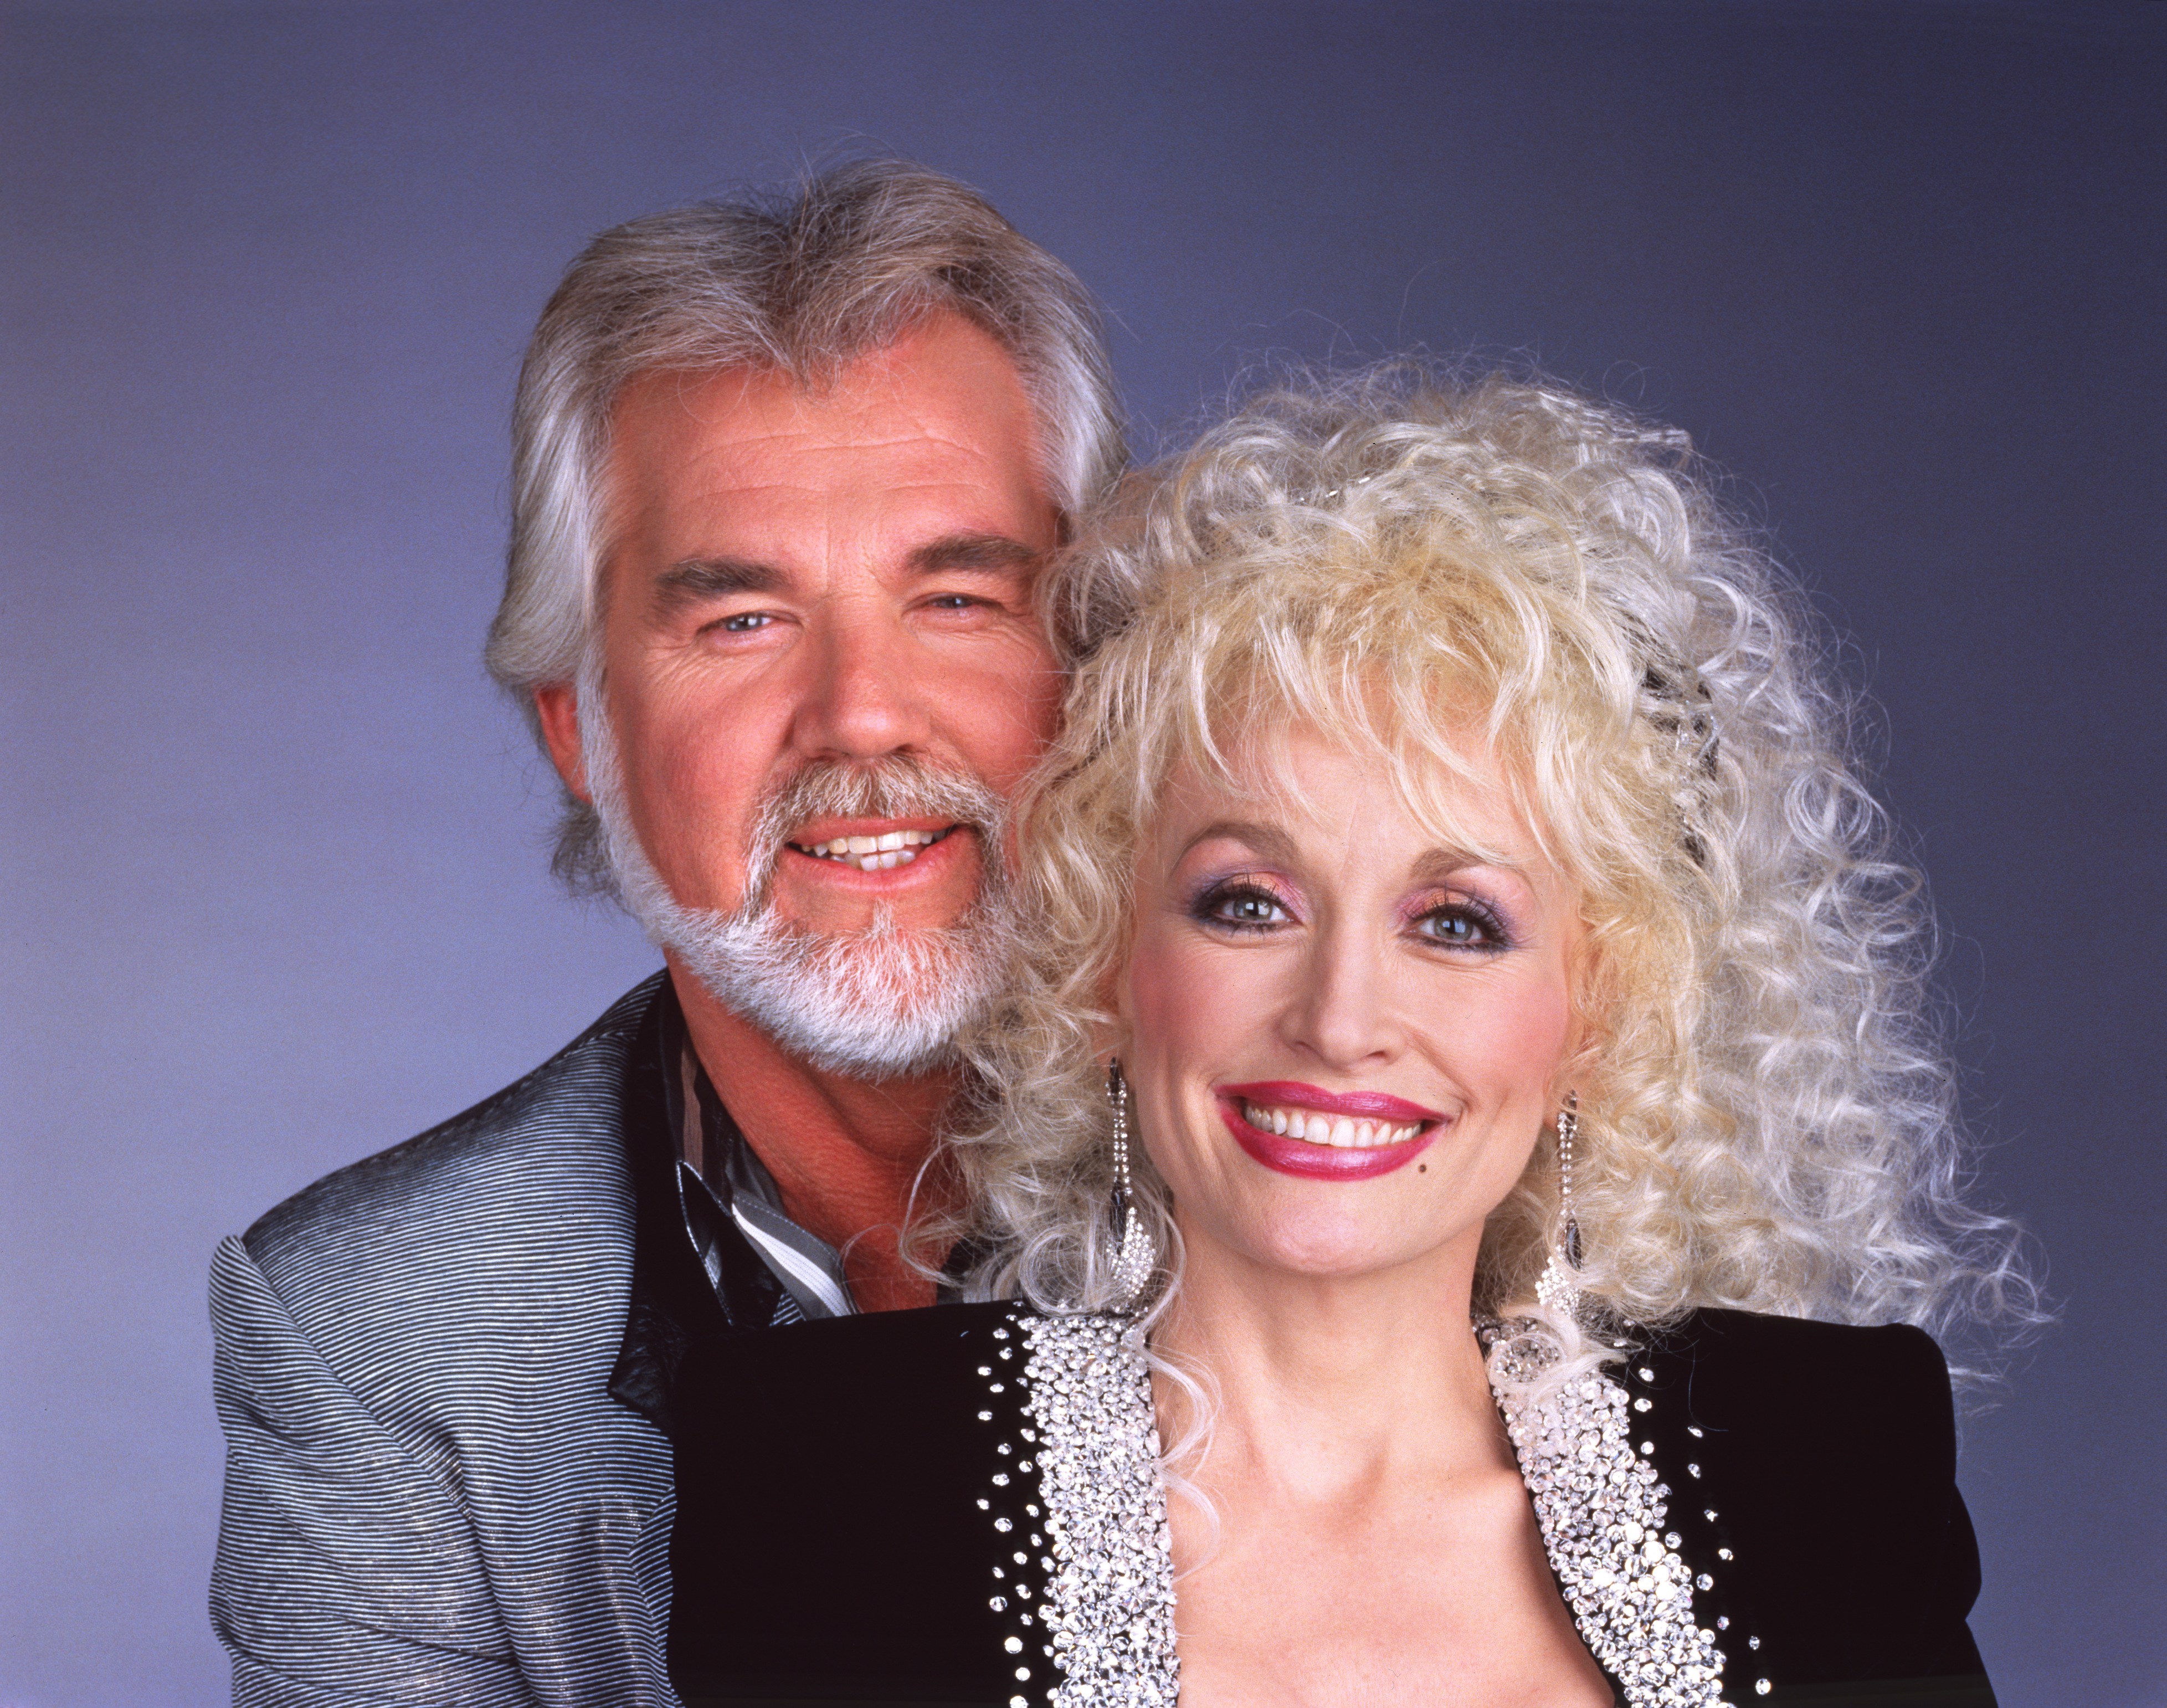 Kenny Rogers and Dolly Parton in a studio potrait in 1987 | Source: Getty Images